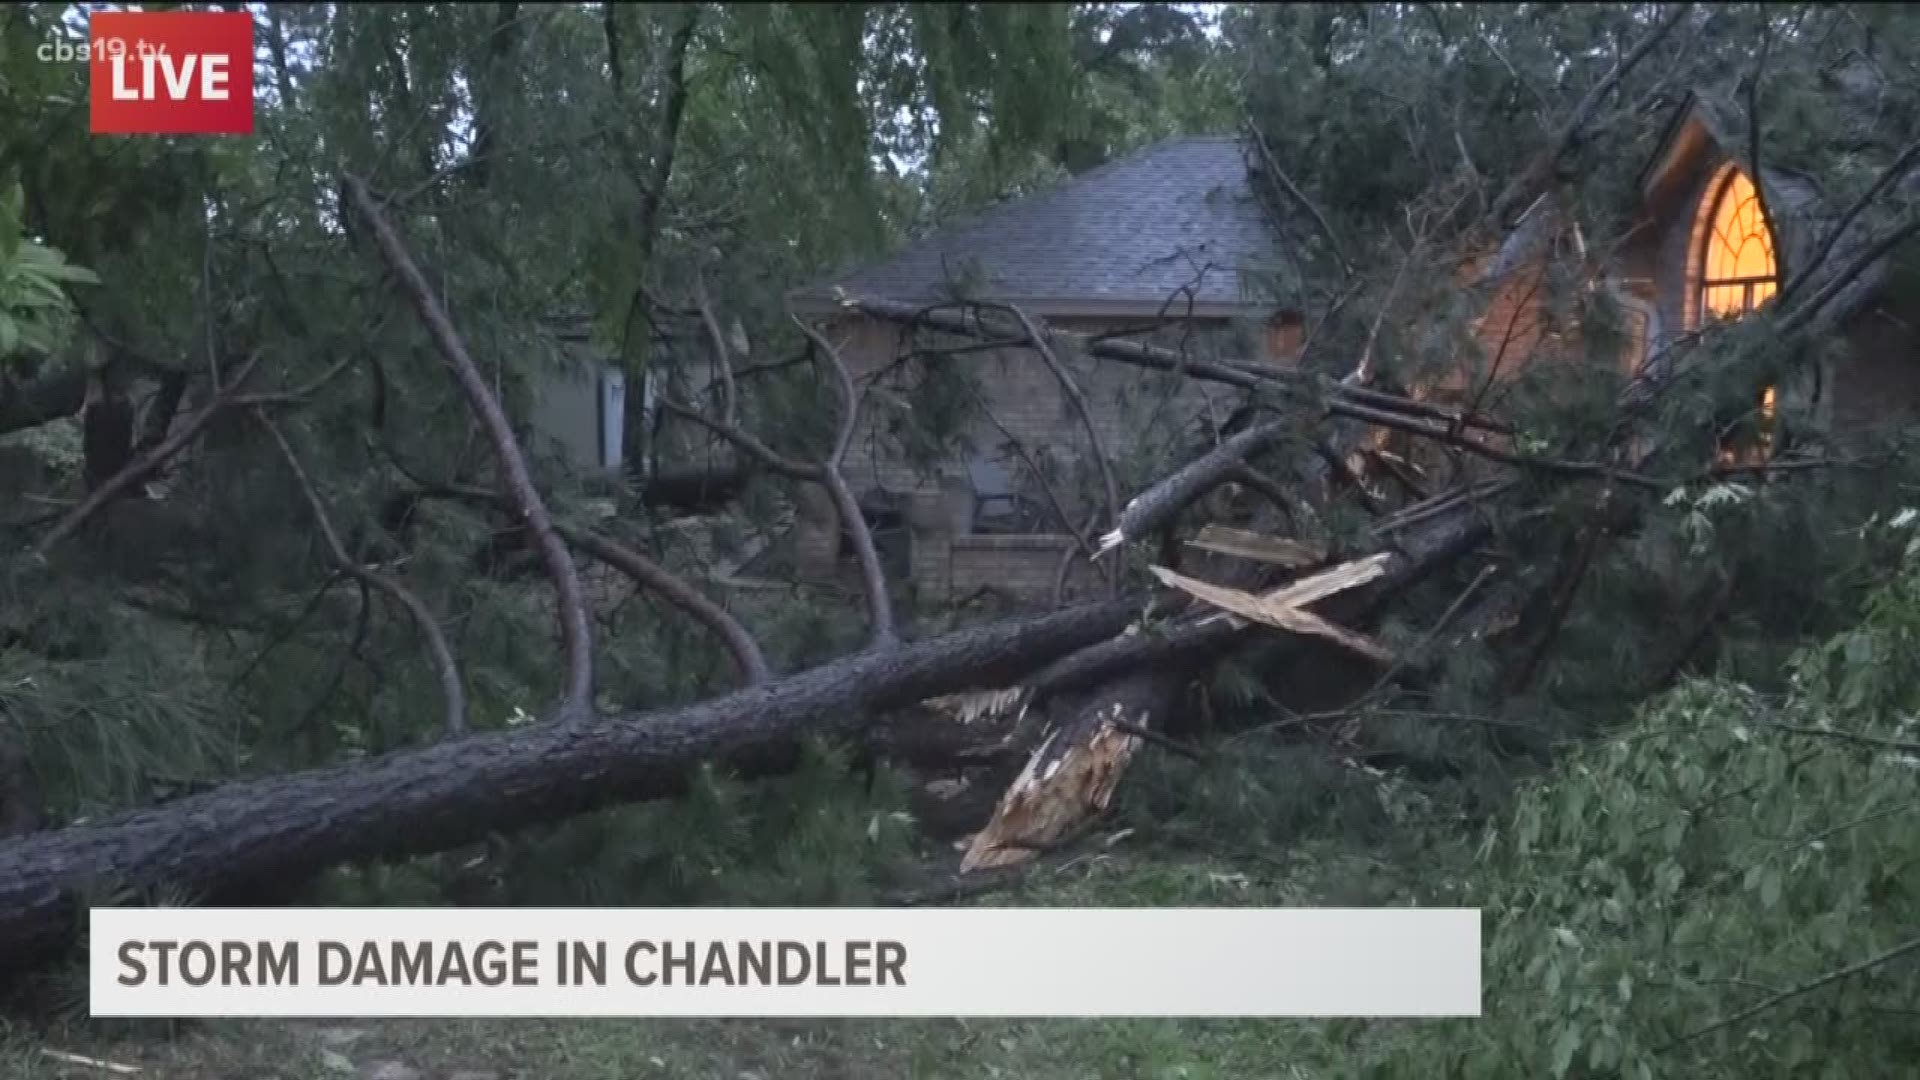 Chandler was just one location in East Texas damaged by the storms.